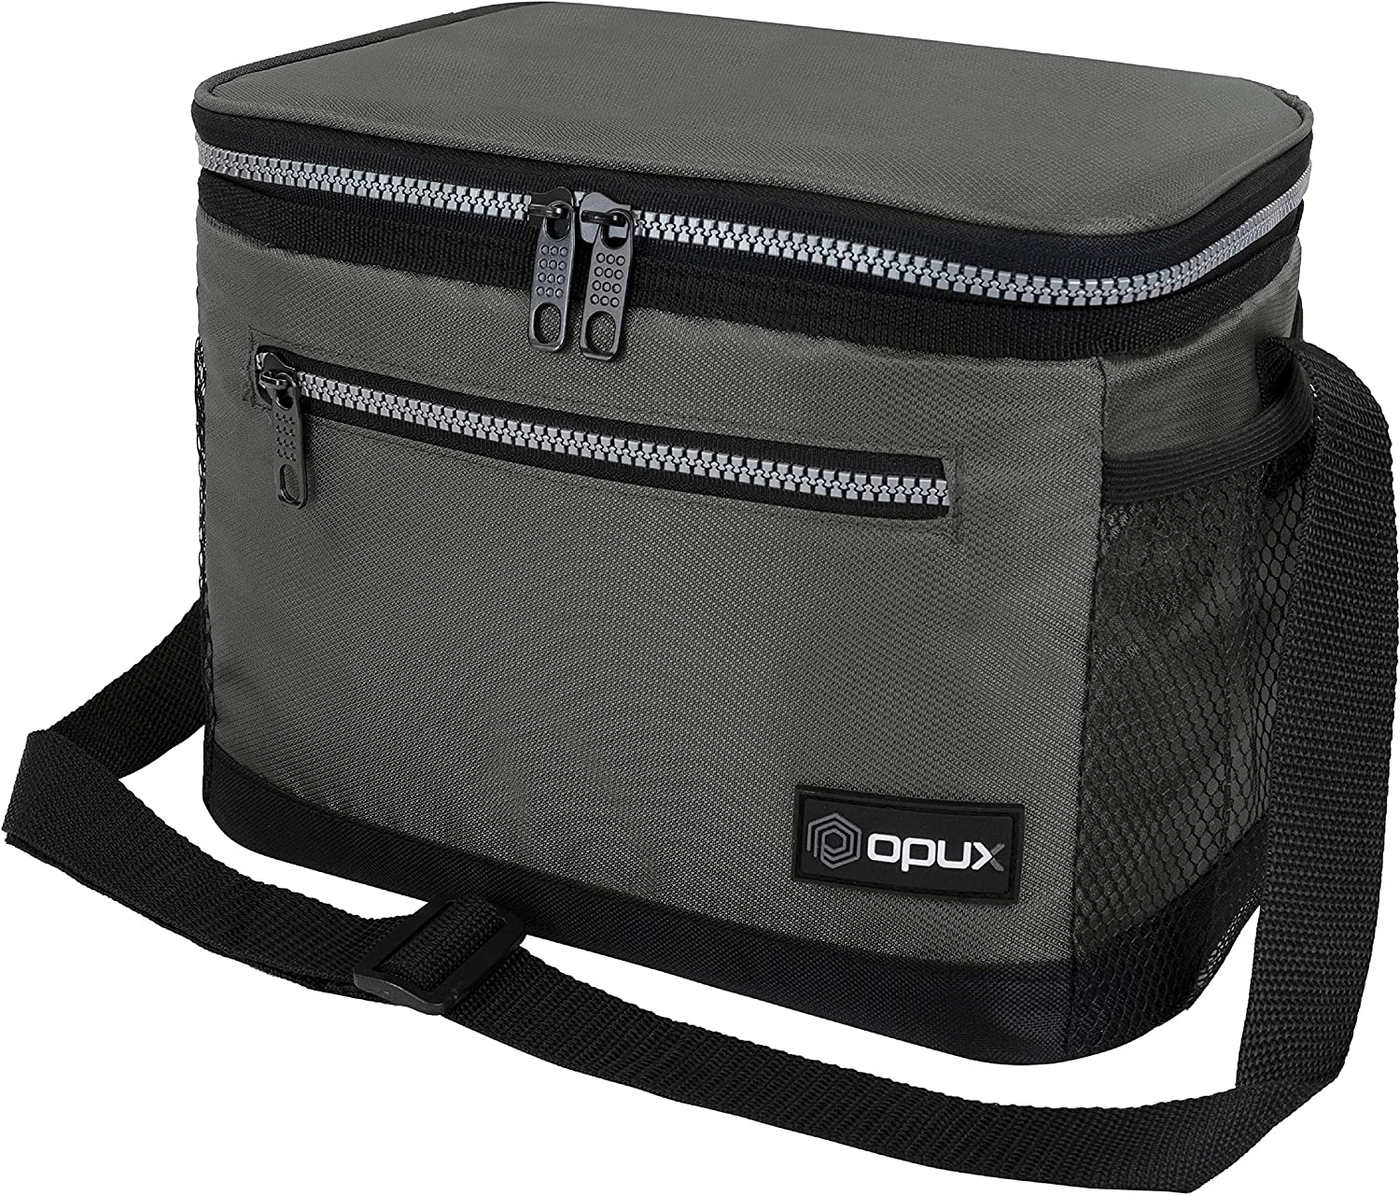 OPUX Insulated Lunch Box for Men Women, Leakproof Thermal Lunch Bag for Work, Reusable Lunch Cooler Tote, Soft School Lunch Pail for Kids with Shoulder Strap, Pockets, 14 Cans, 8L, Grey